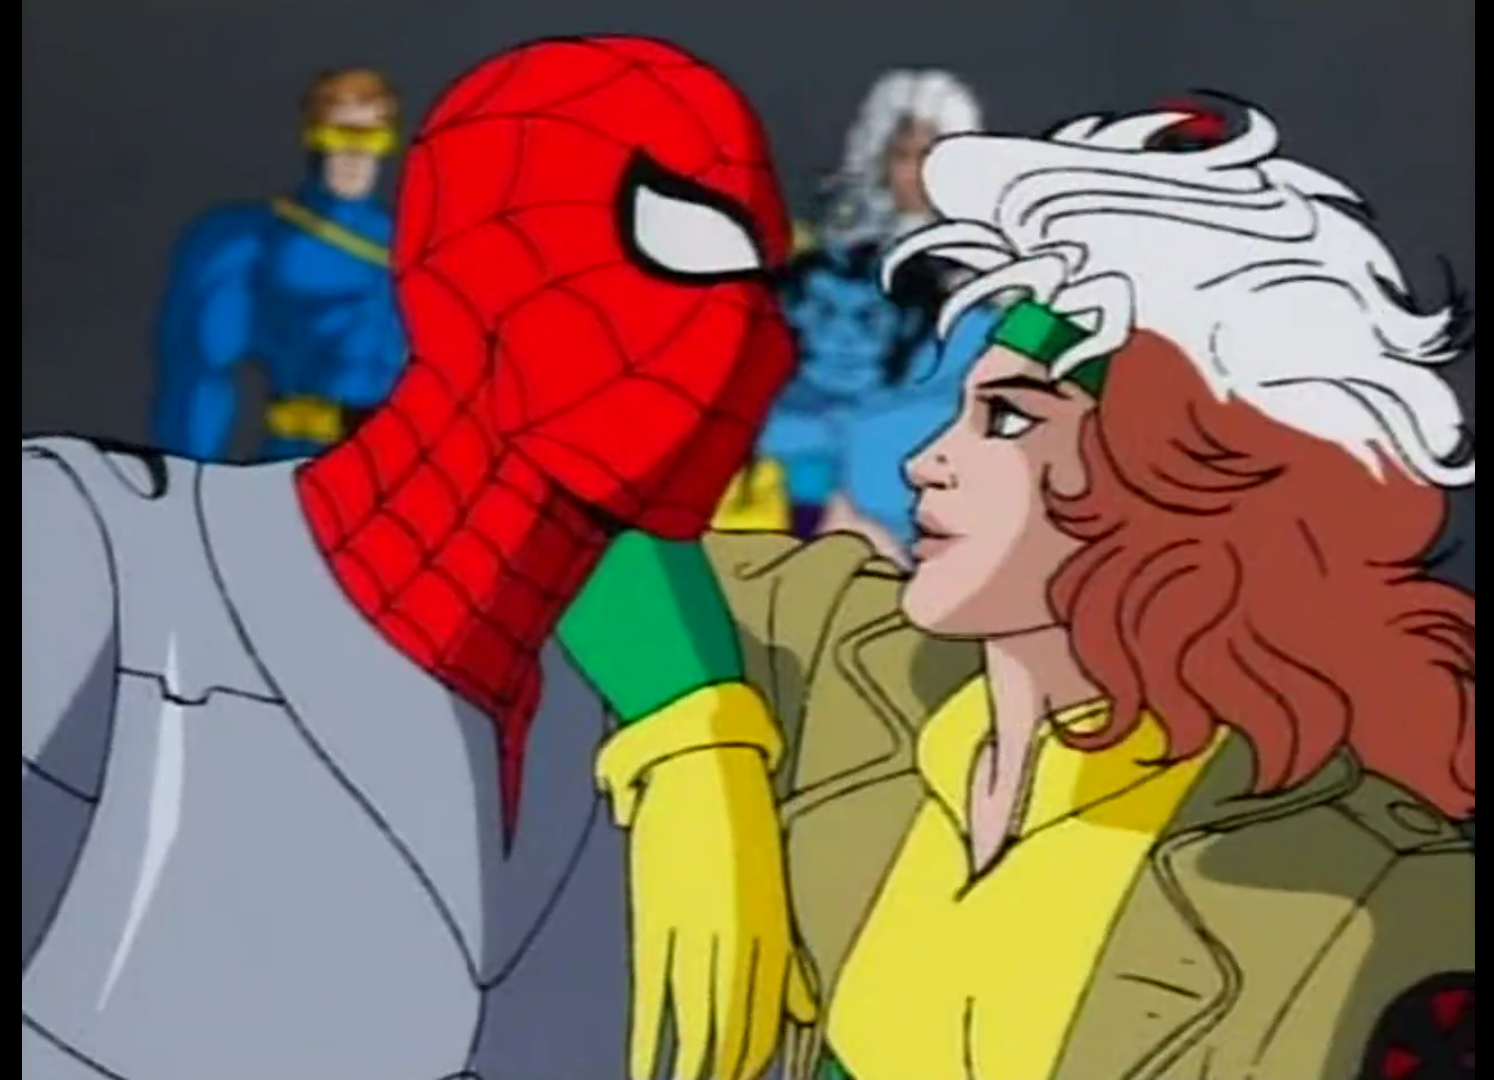 The most fucked up crossover of my childhood - Spiderman, X-Men, Cartoons